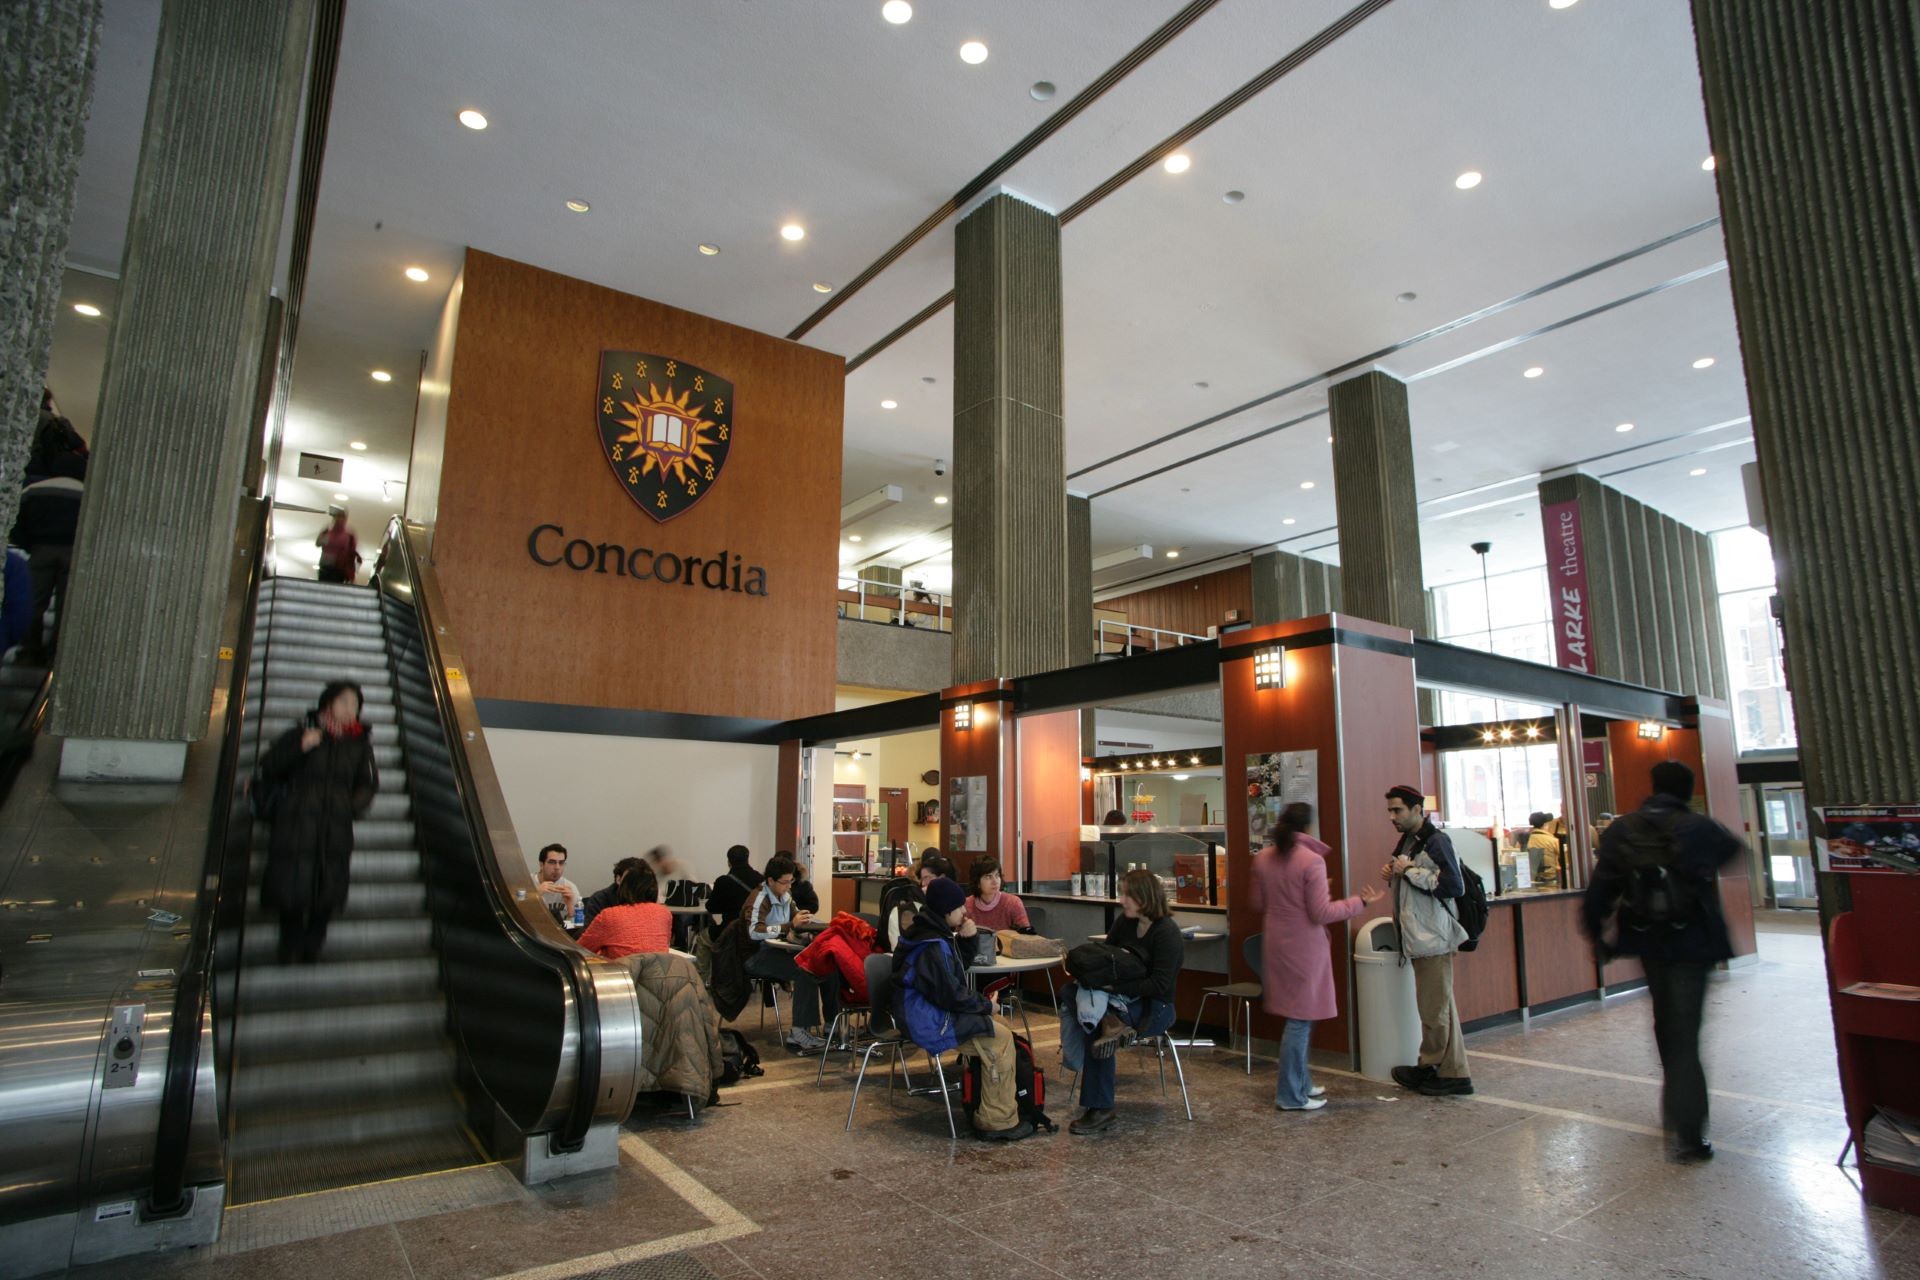 The bustling interior of Concordia University's Hall Building, featuring students and a café area under the university's logo.